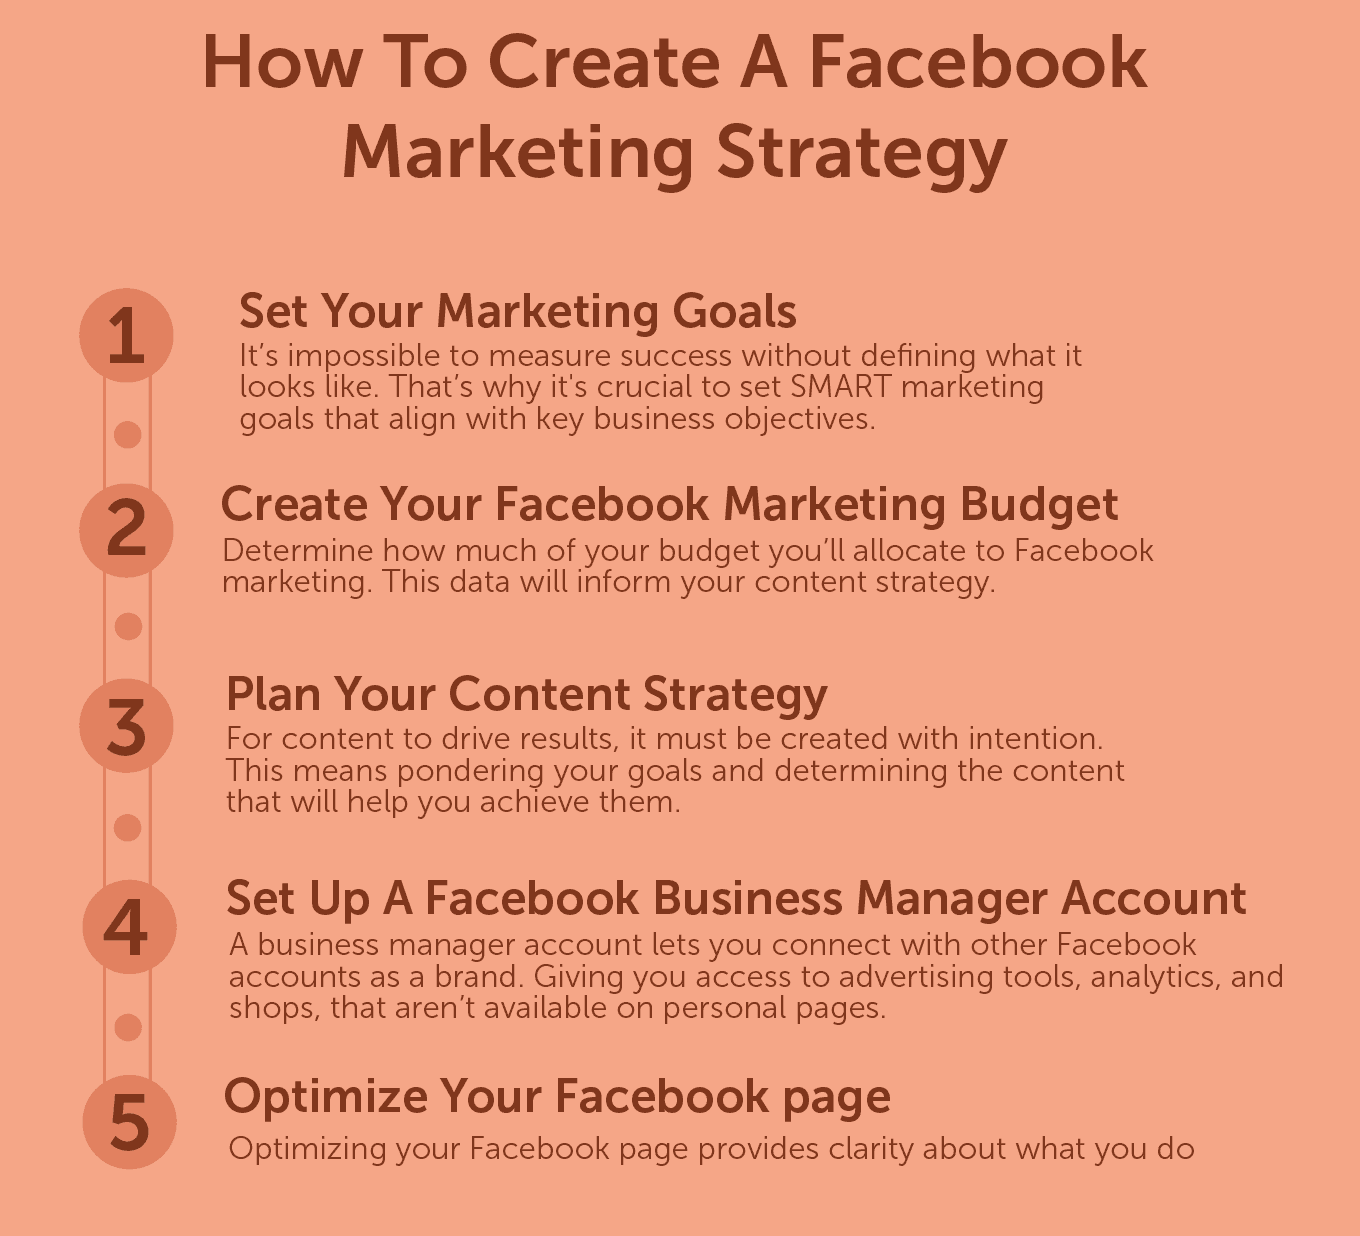 How to create a Facebook marketing strategy in 5 steps